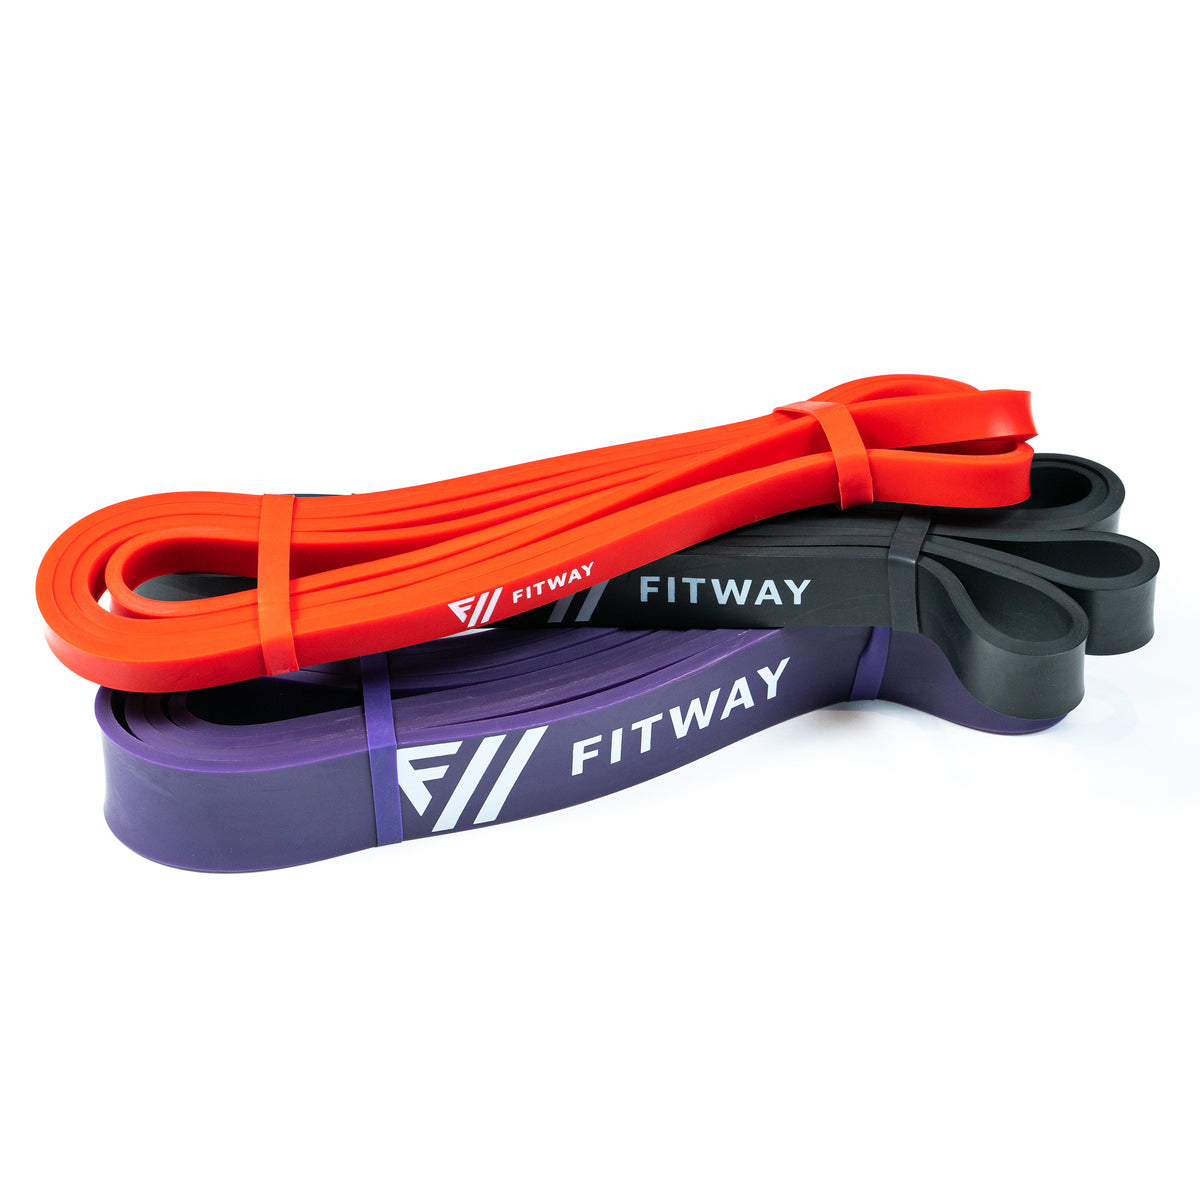 FitWay Equip. Heavy Duty Resistance Band Set 